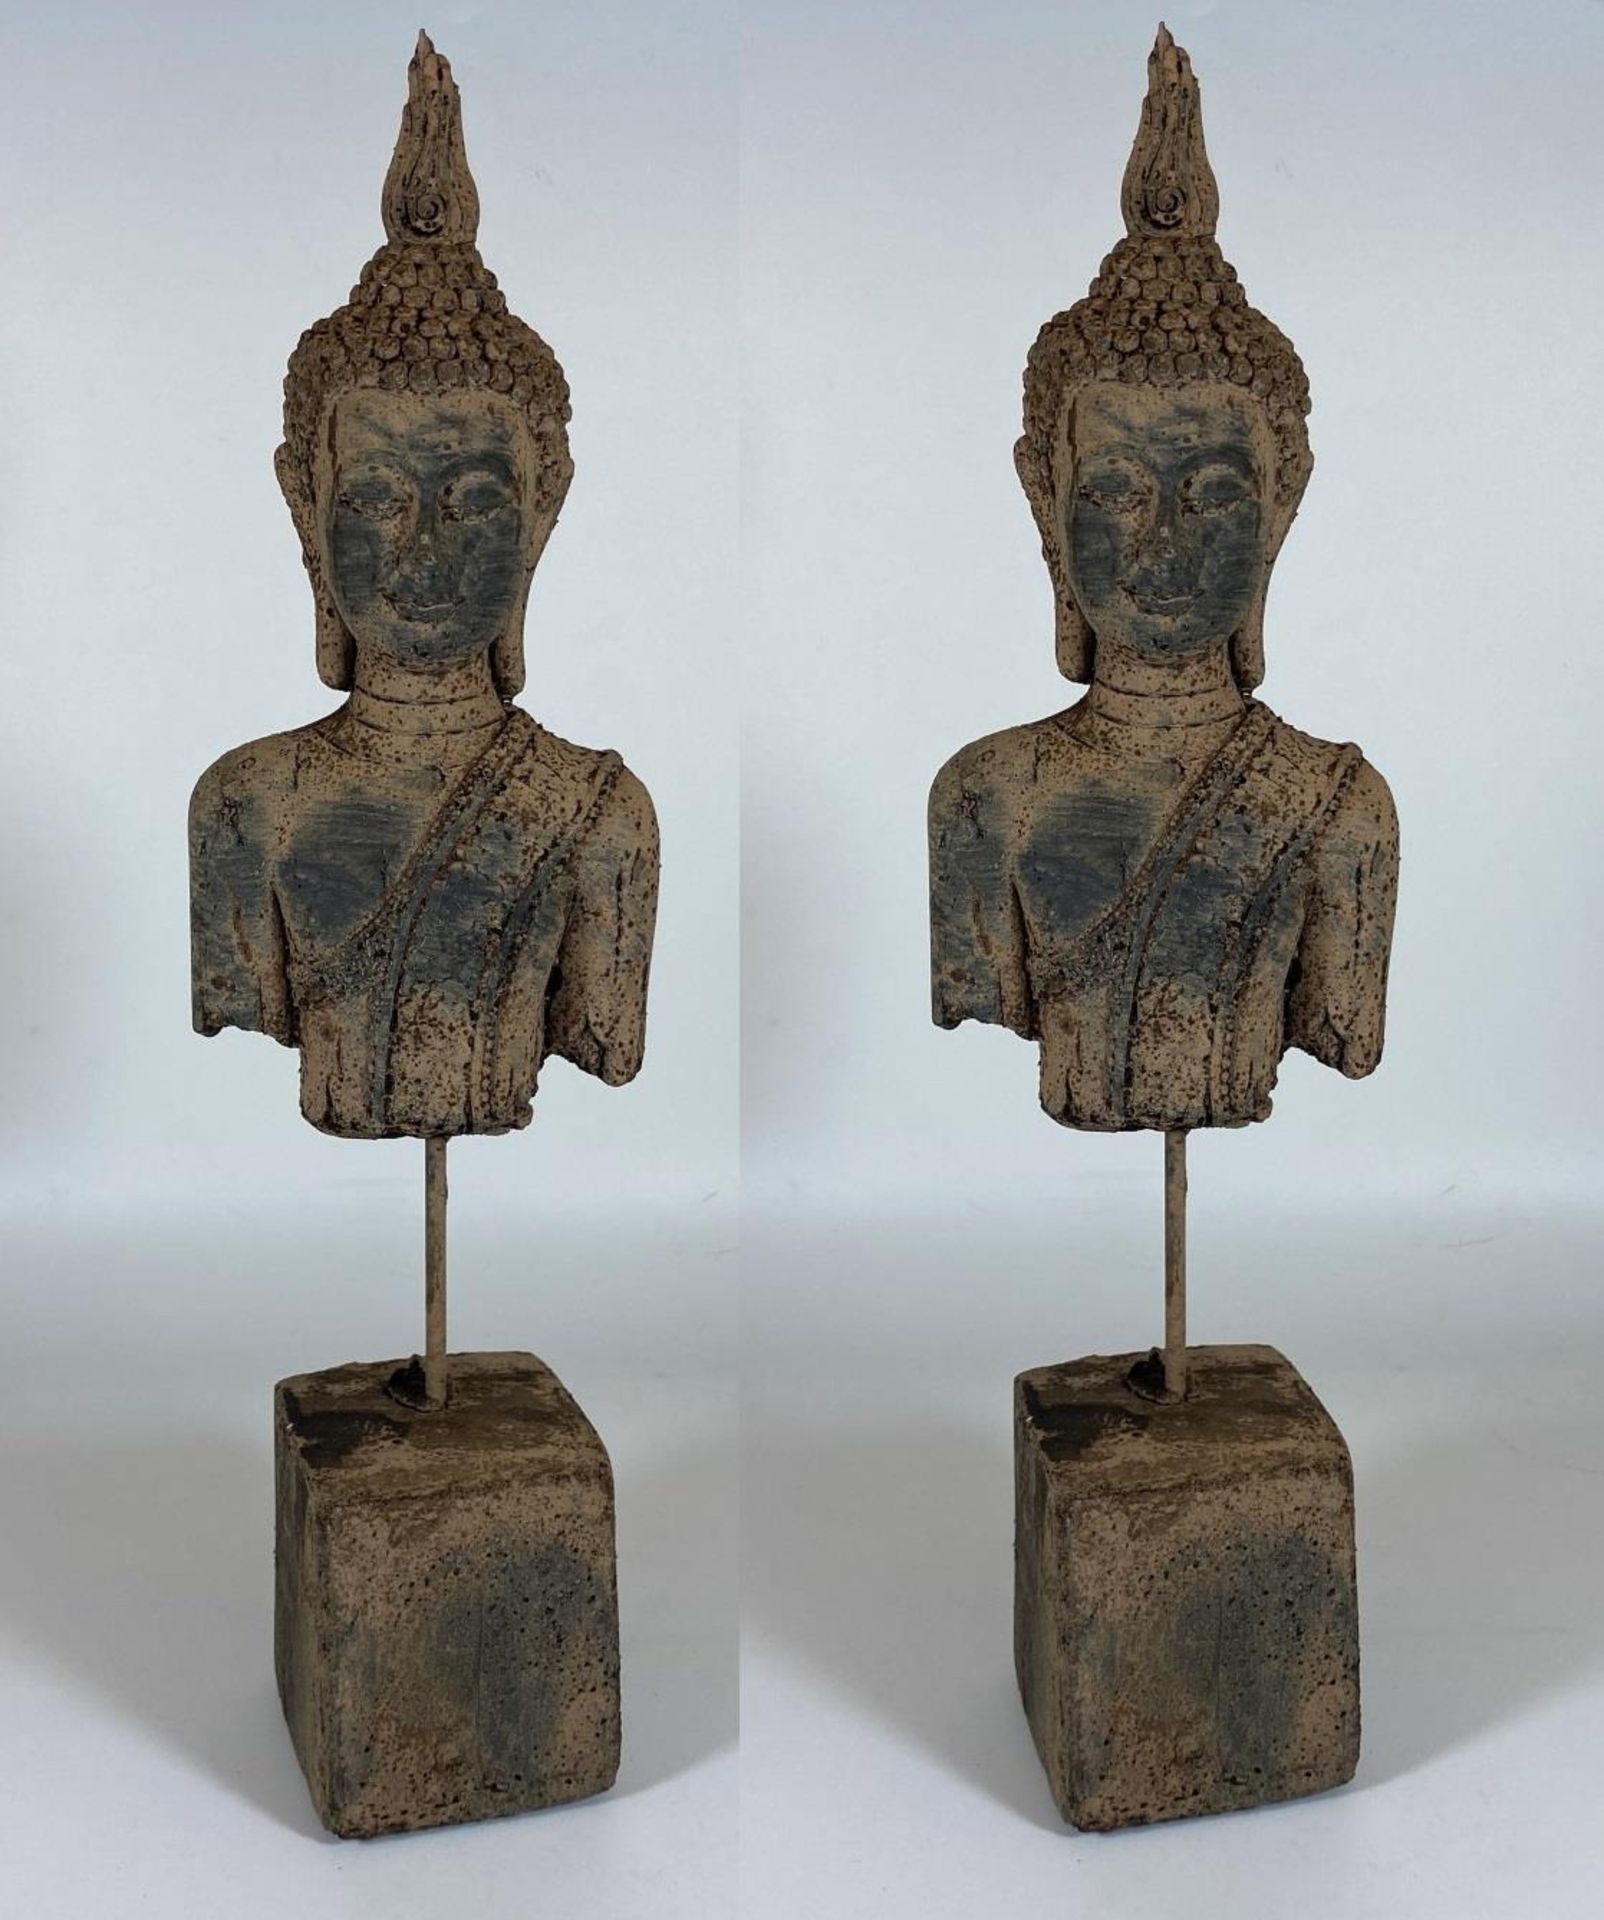 A PAIR OF DECORATIVE STONE BUDDHAS ON PLINTH BASES, HEIGHT 39 CM